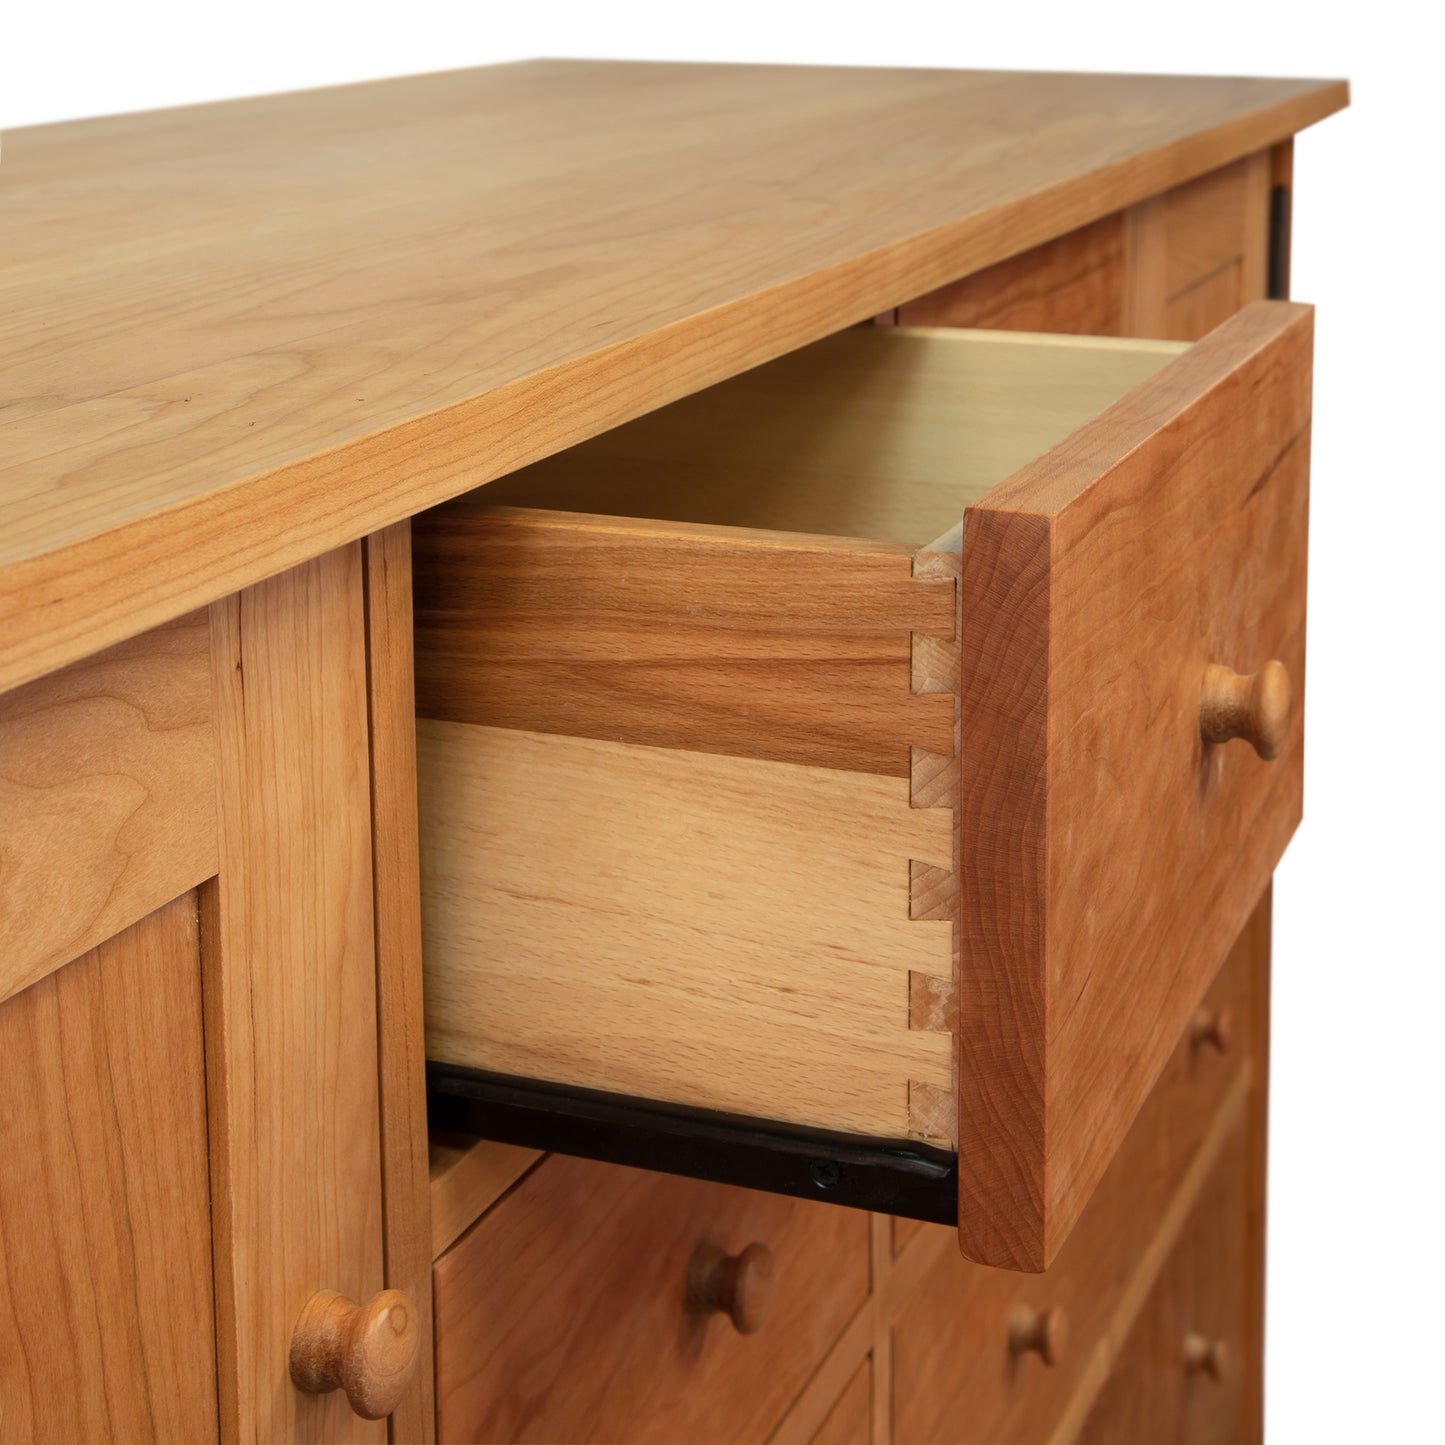 A solid wood Vermont Furniture Designs Burlington Shaker 8-Drawer 2-Door dresser with an open drawer showing dovetail joint construction.